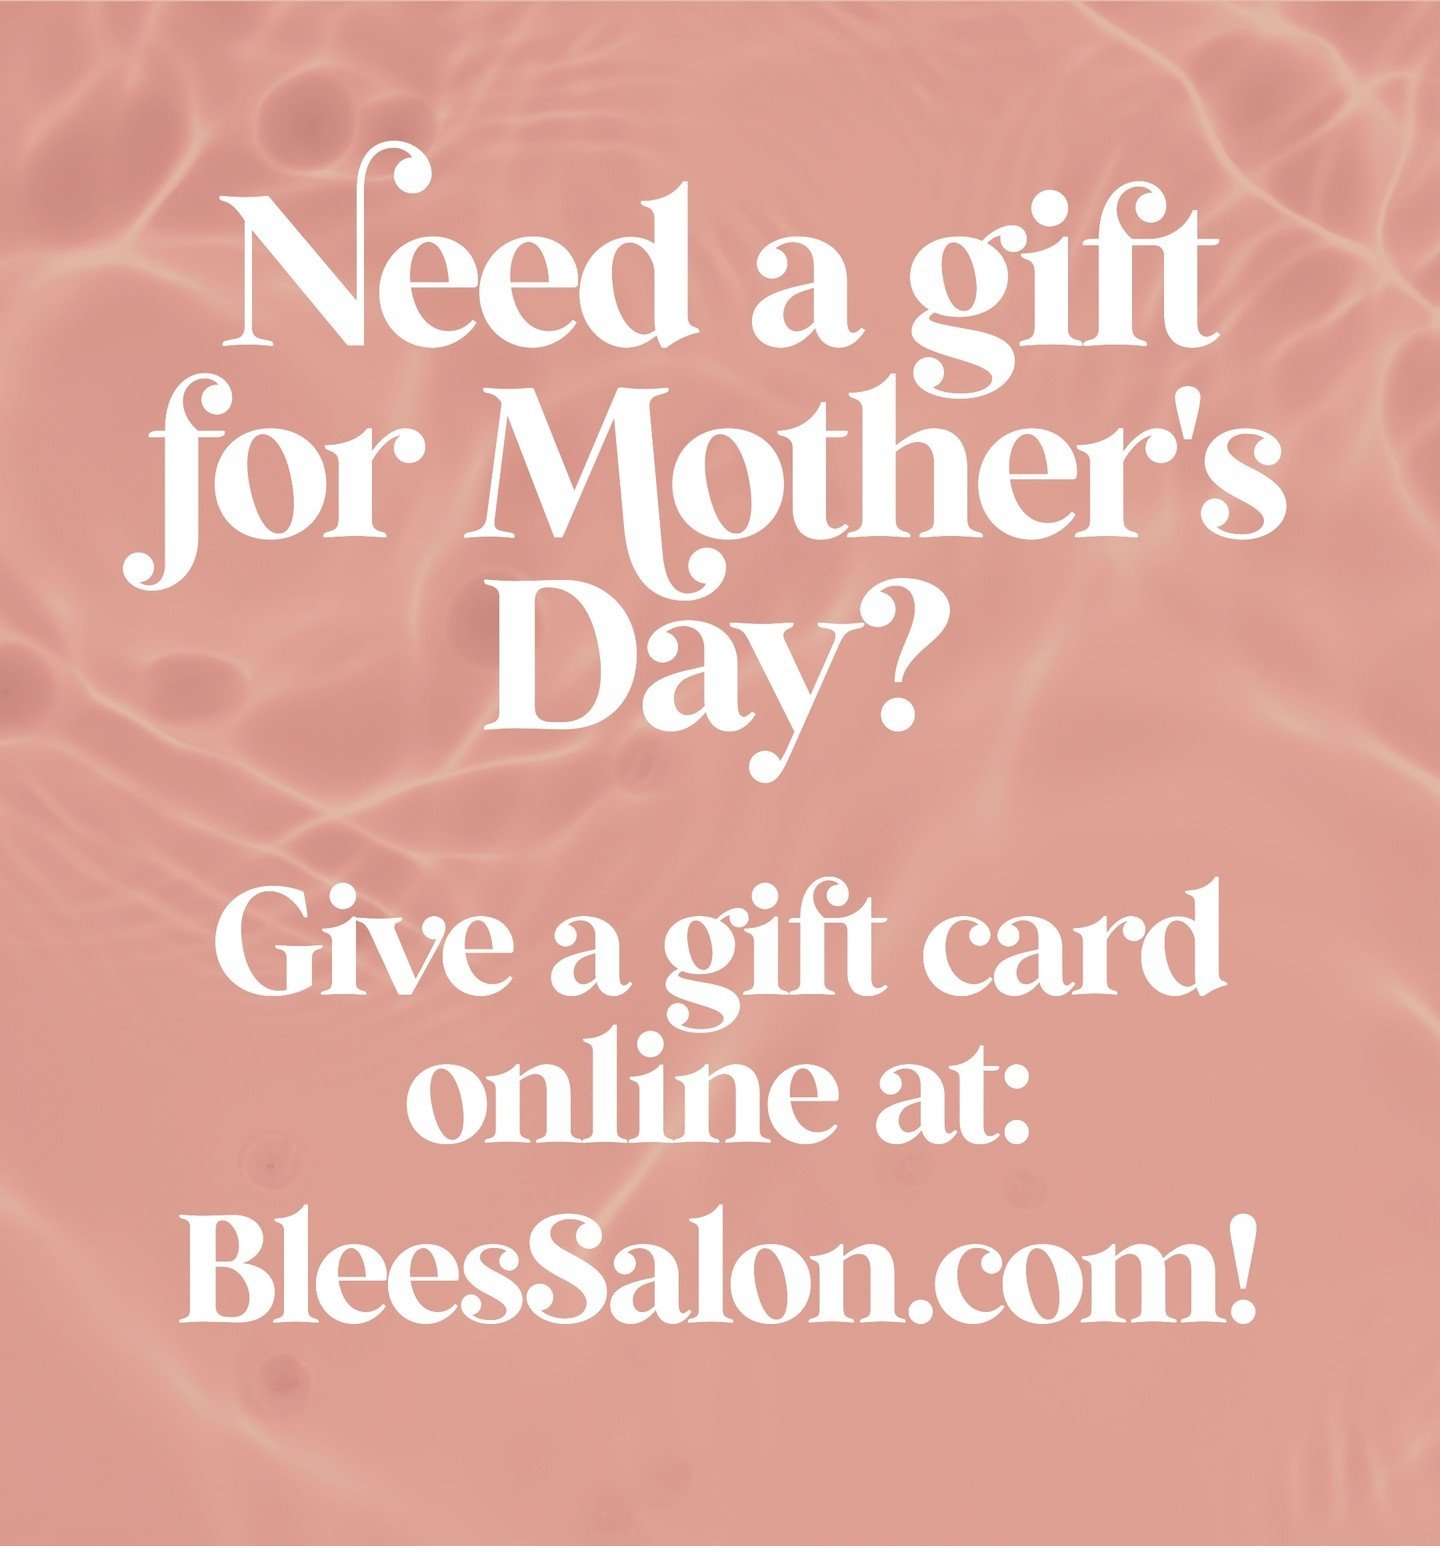 Wishing all the Moms and Caregivers a Happy Mother's Day this weekend! Gift cards can be used on all services and products in the salon. Go to BleesSalon.com or call (518) 585-2557.
#mothersday #happymothersday #lovemakesafamily